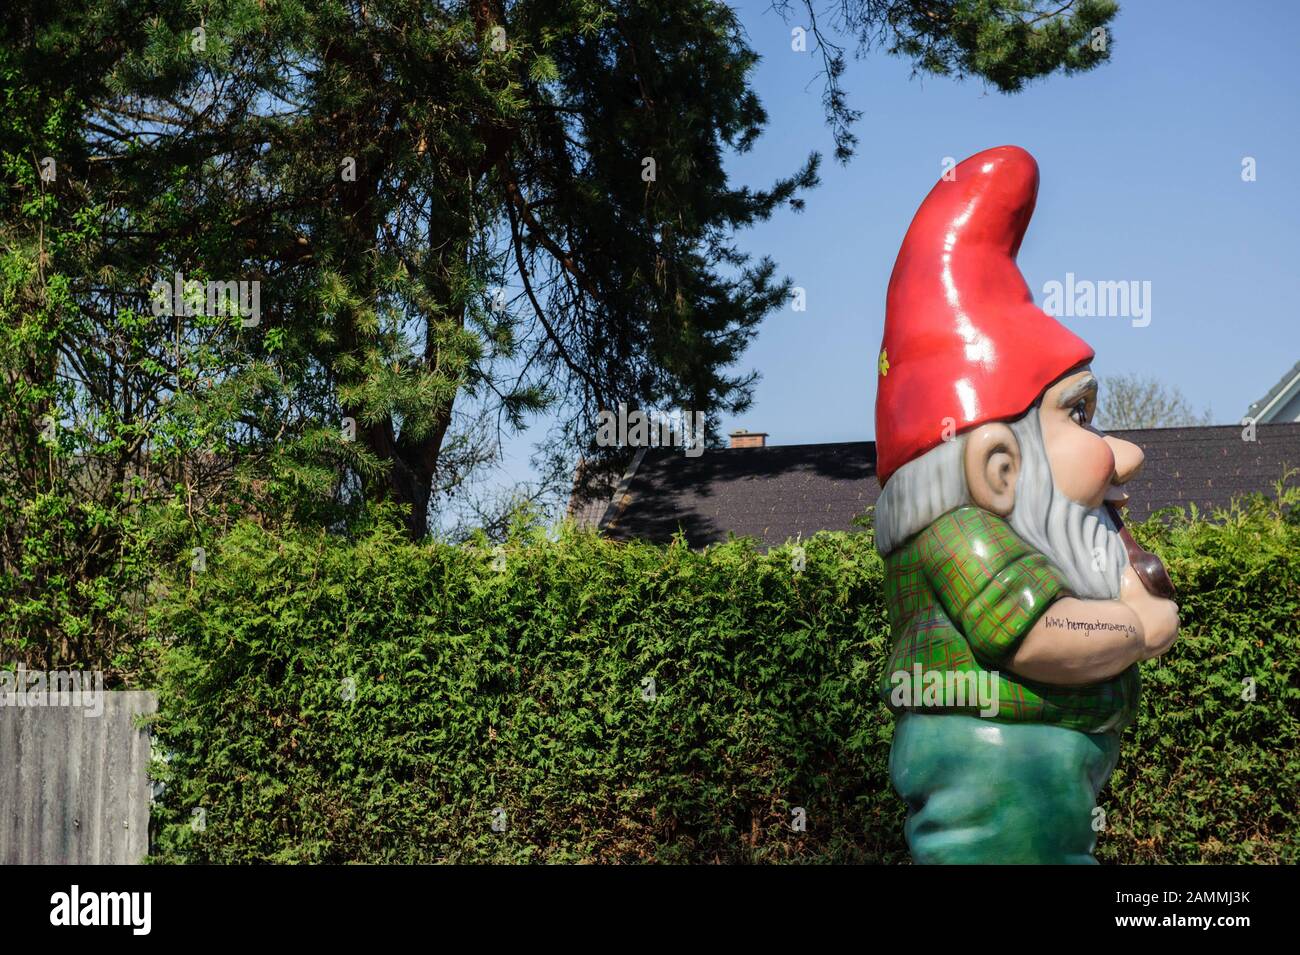 At Lochhausener Straße, an oversized garden gnome stands on a trailer at Lochhausen S-Bahn station and advertises a gardening aid station. [automated translation] Stock Photo